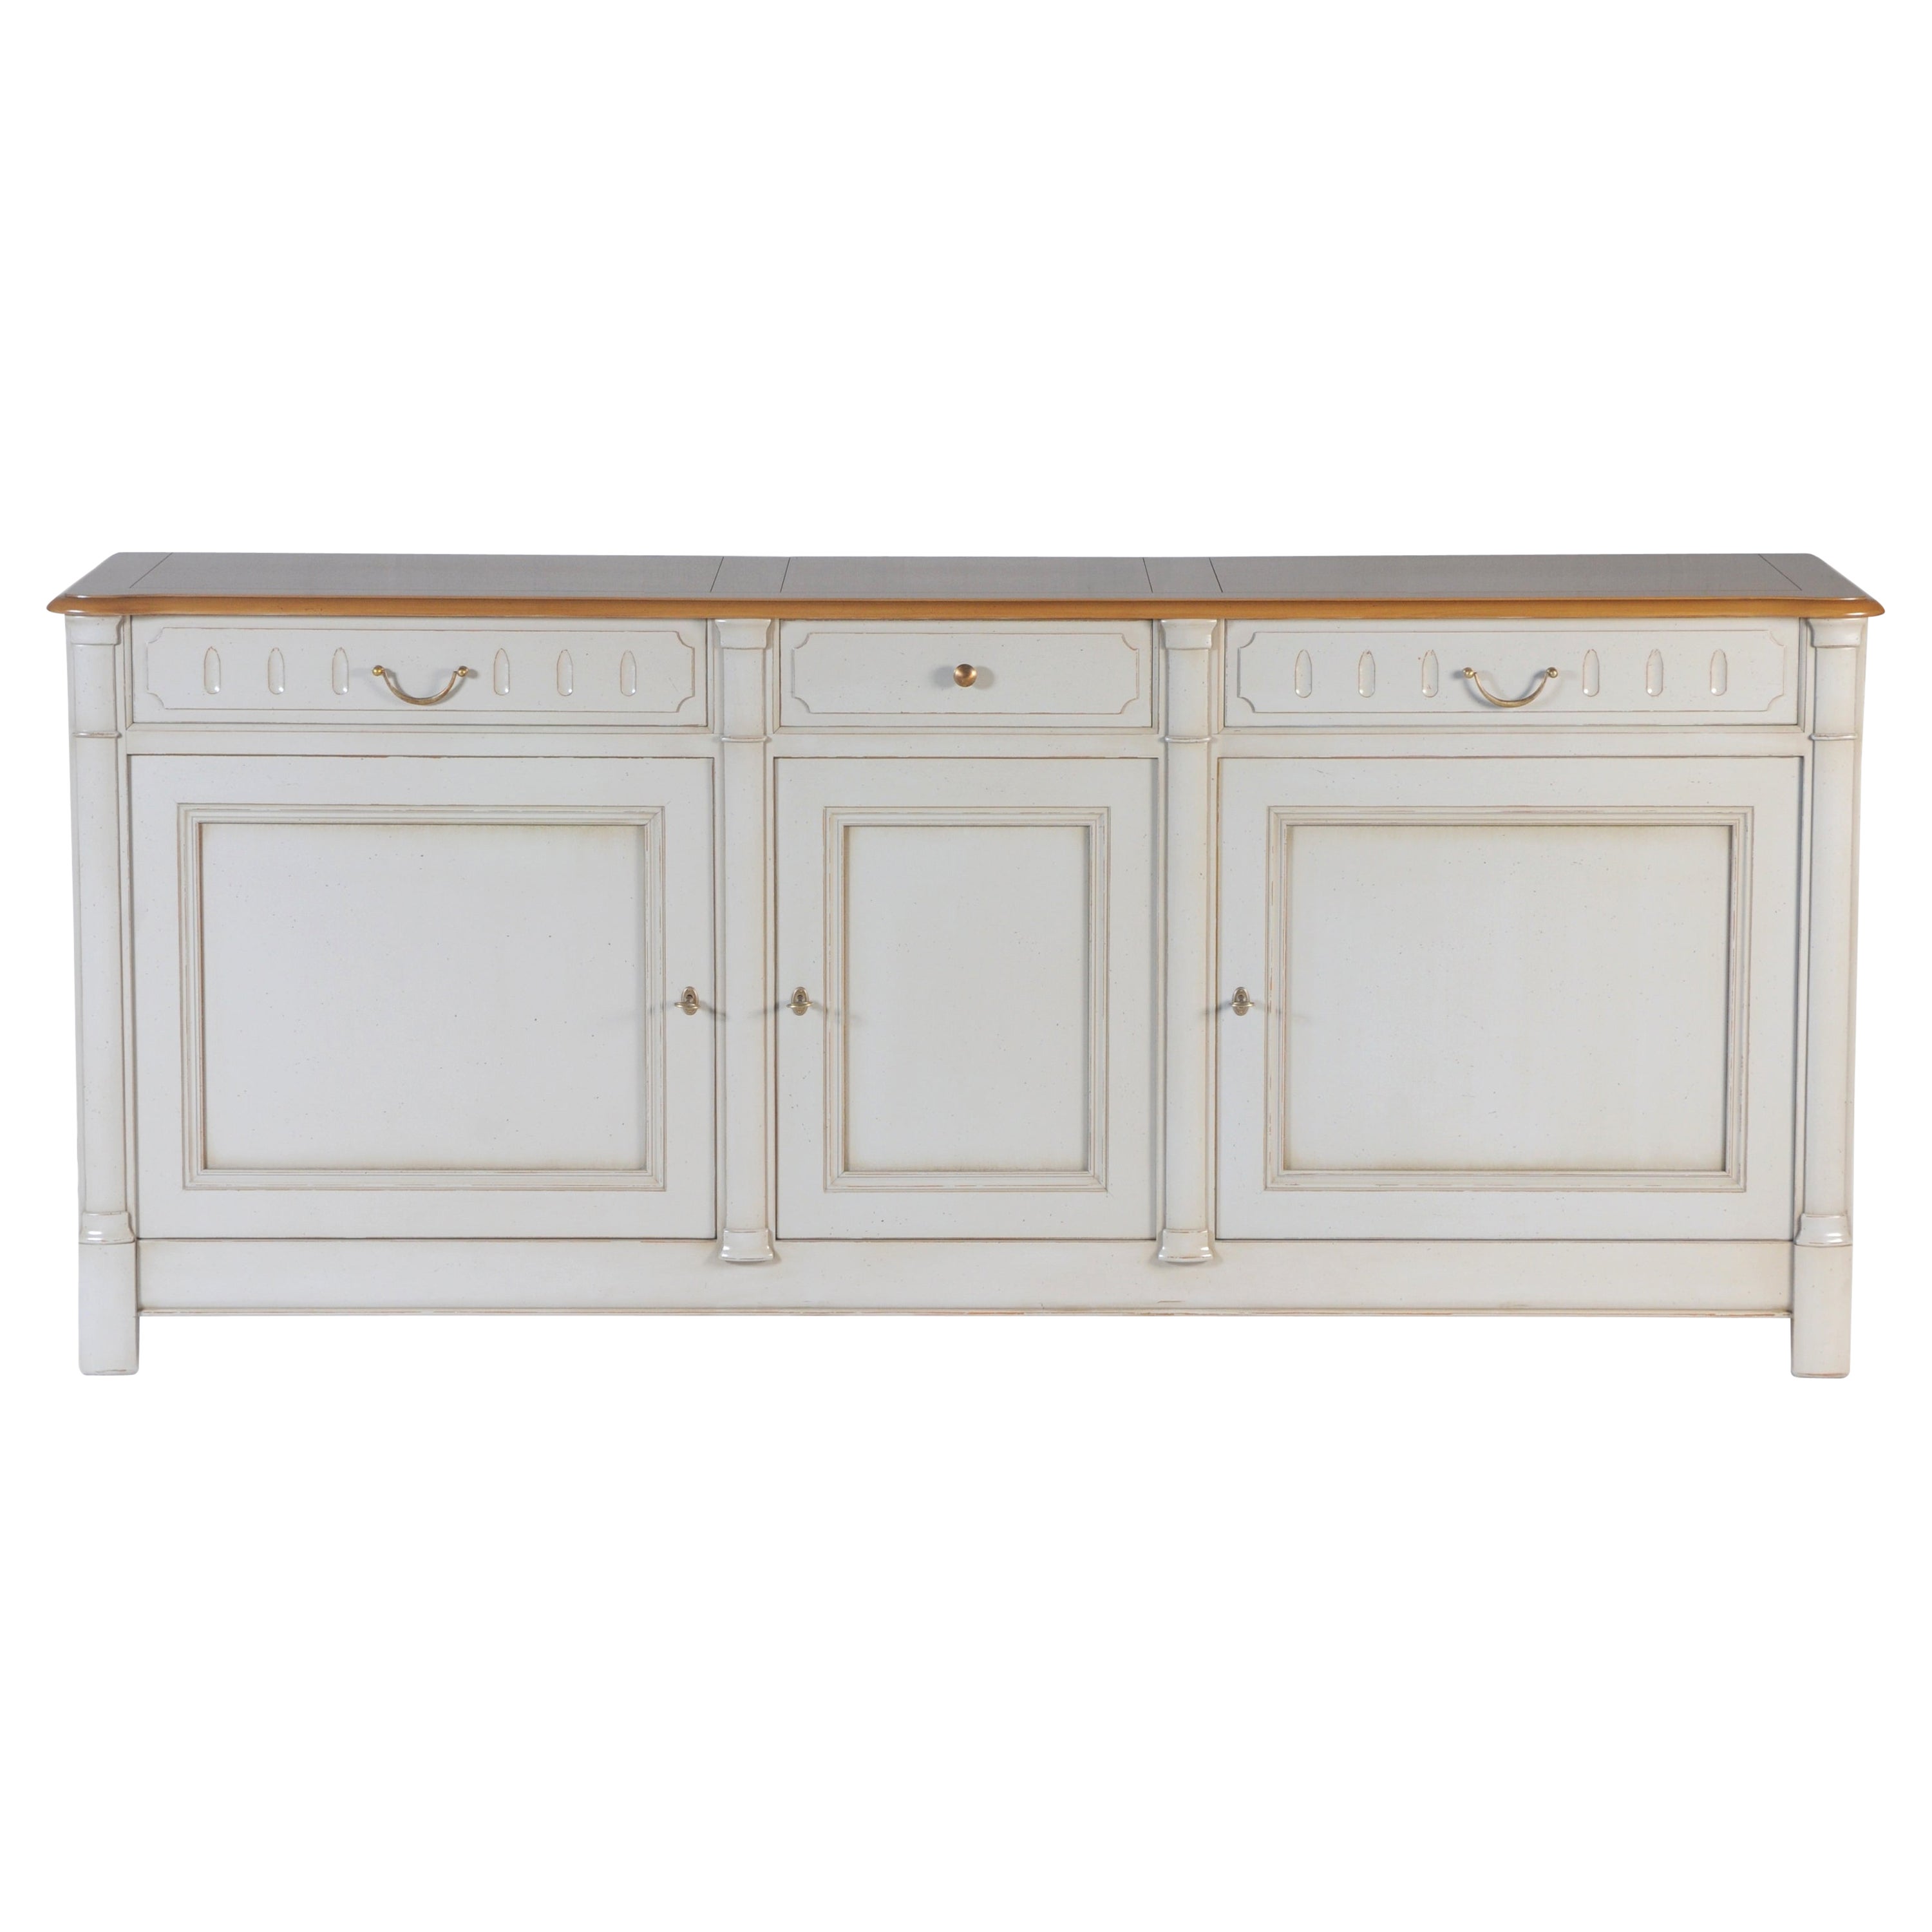 3 Doors Charm French Buffet in Solid Cherry Wood